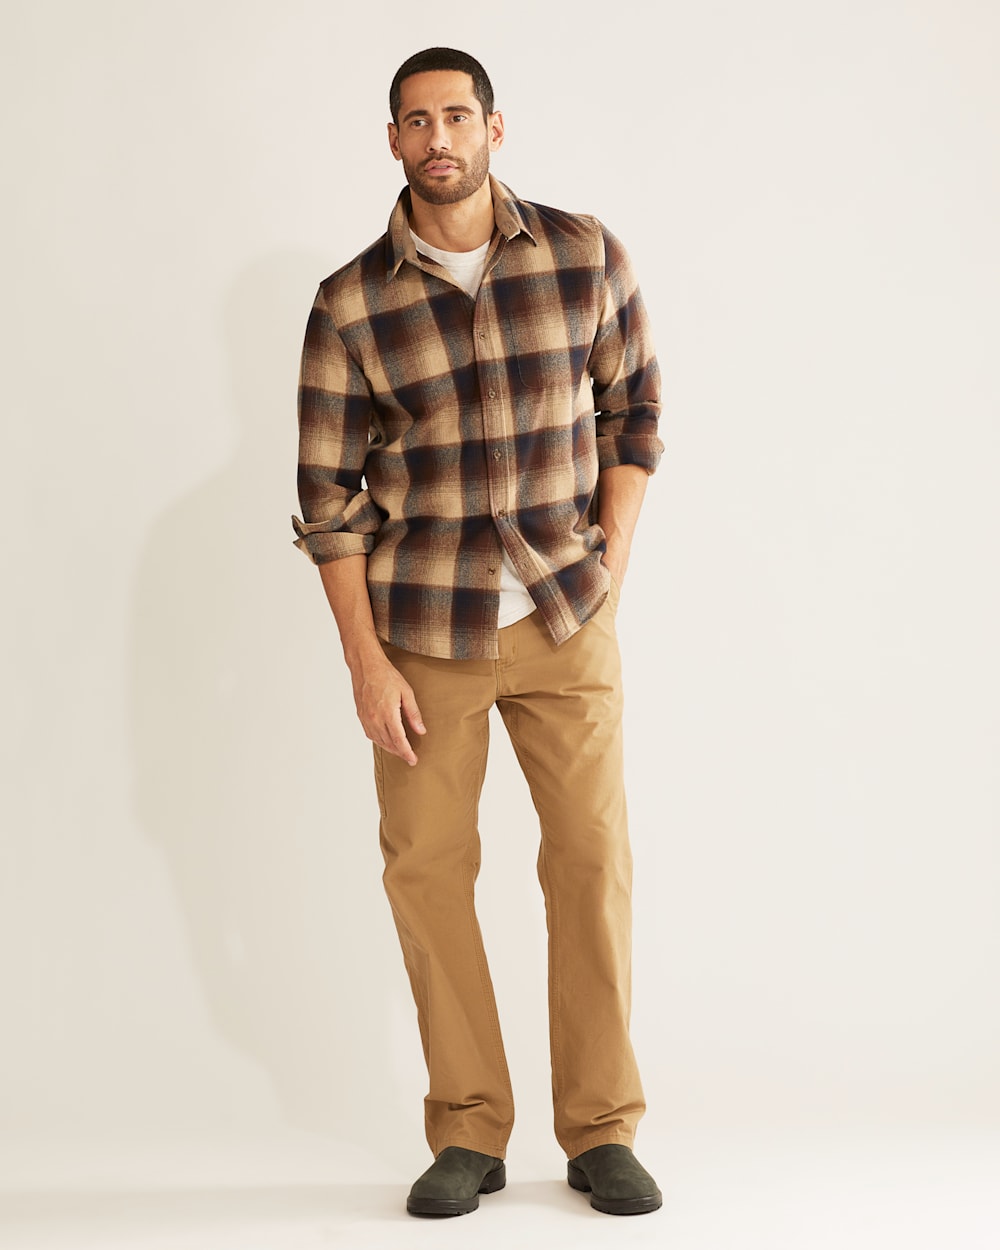 ALTERNATE VIEW OF MEN'S PLAID LODGE SHIRT IN BROWN/NAVY OMBRE image number 1